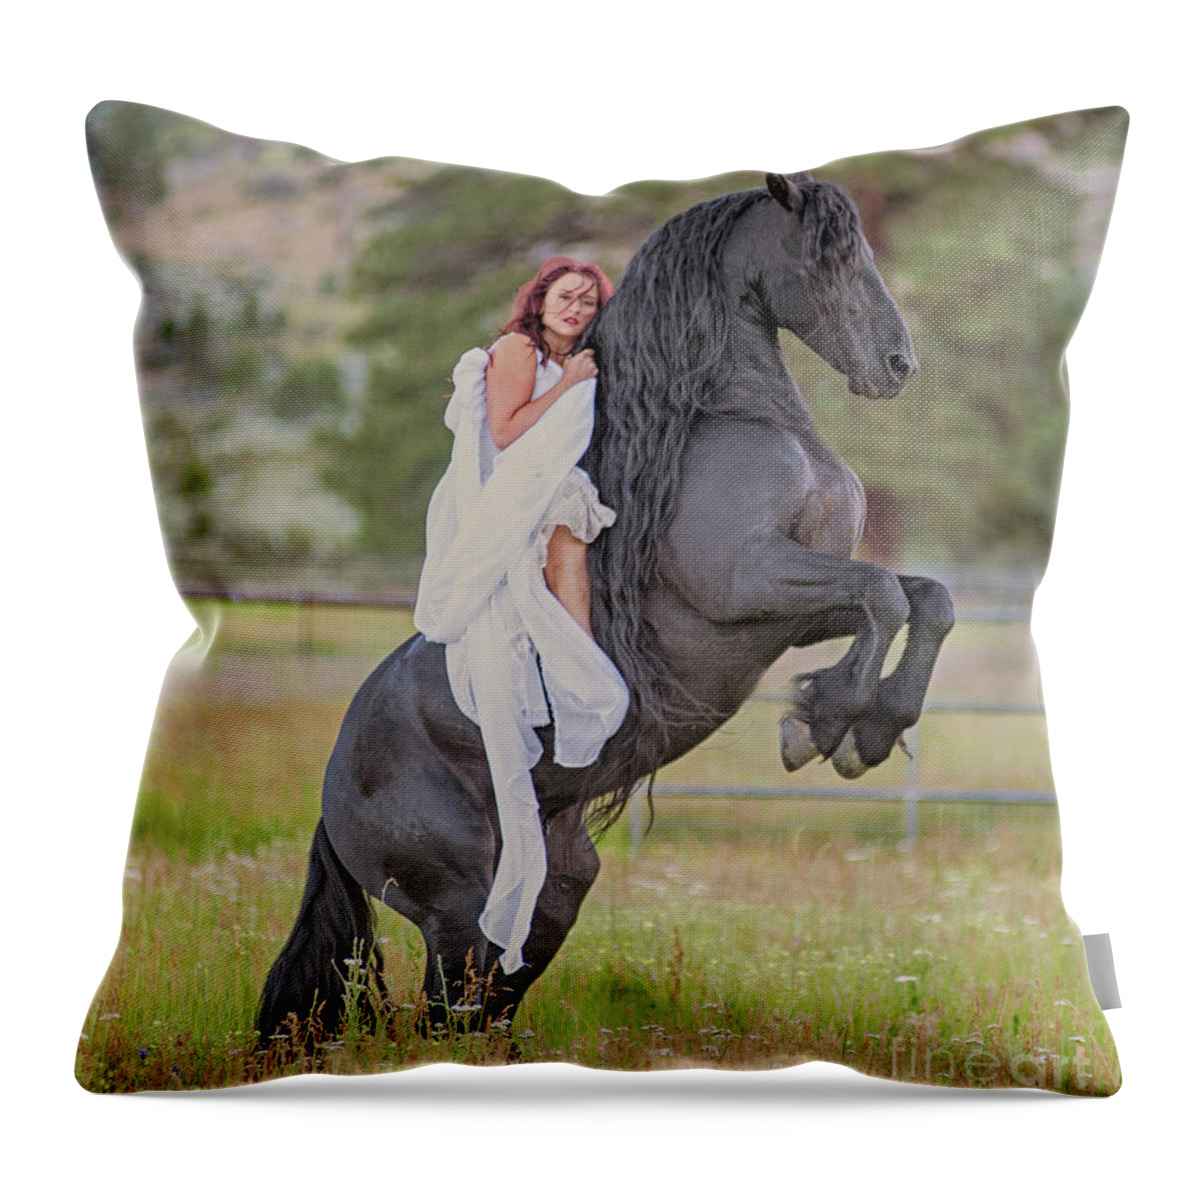 Woman Throw Pillow featuring the photograph Spirit of the Missed by Jody Miller